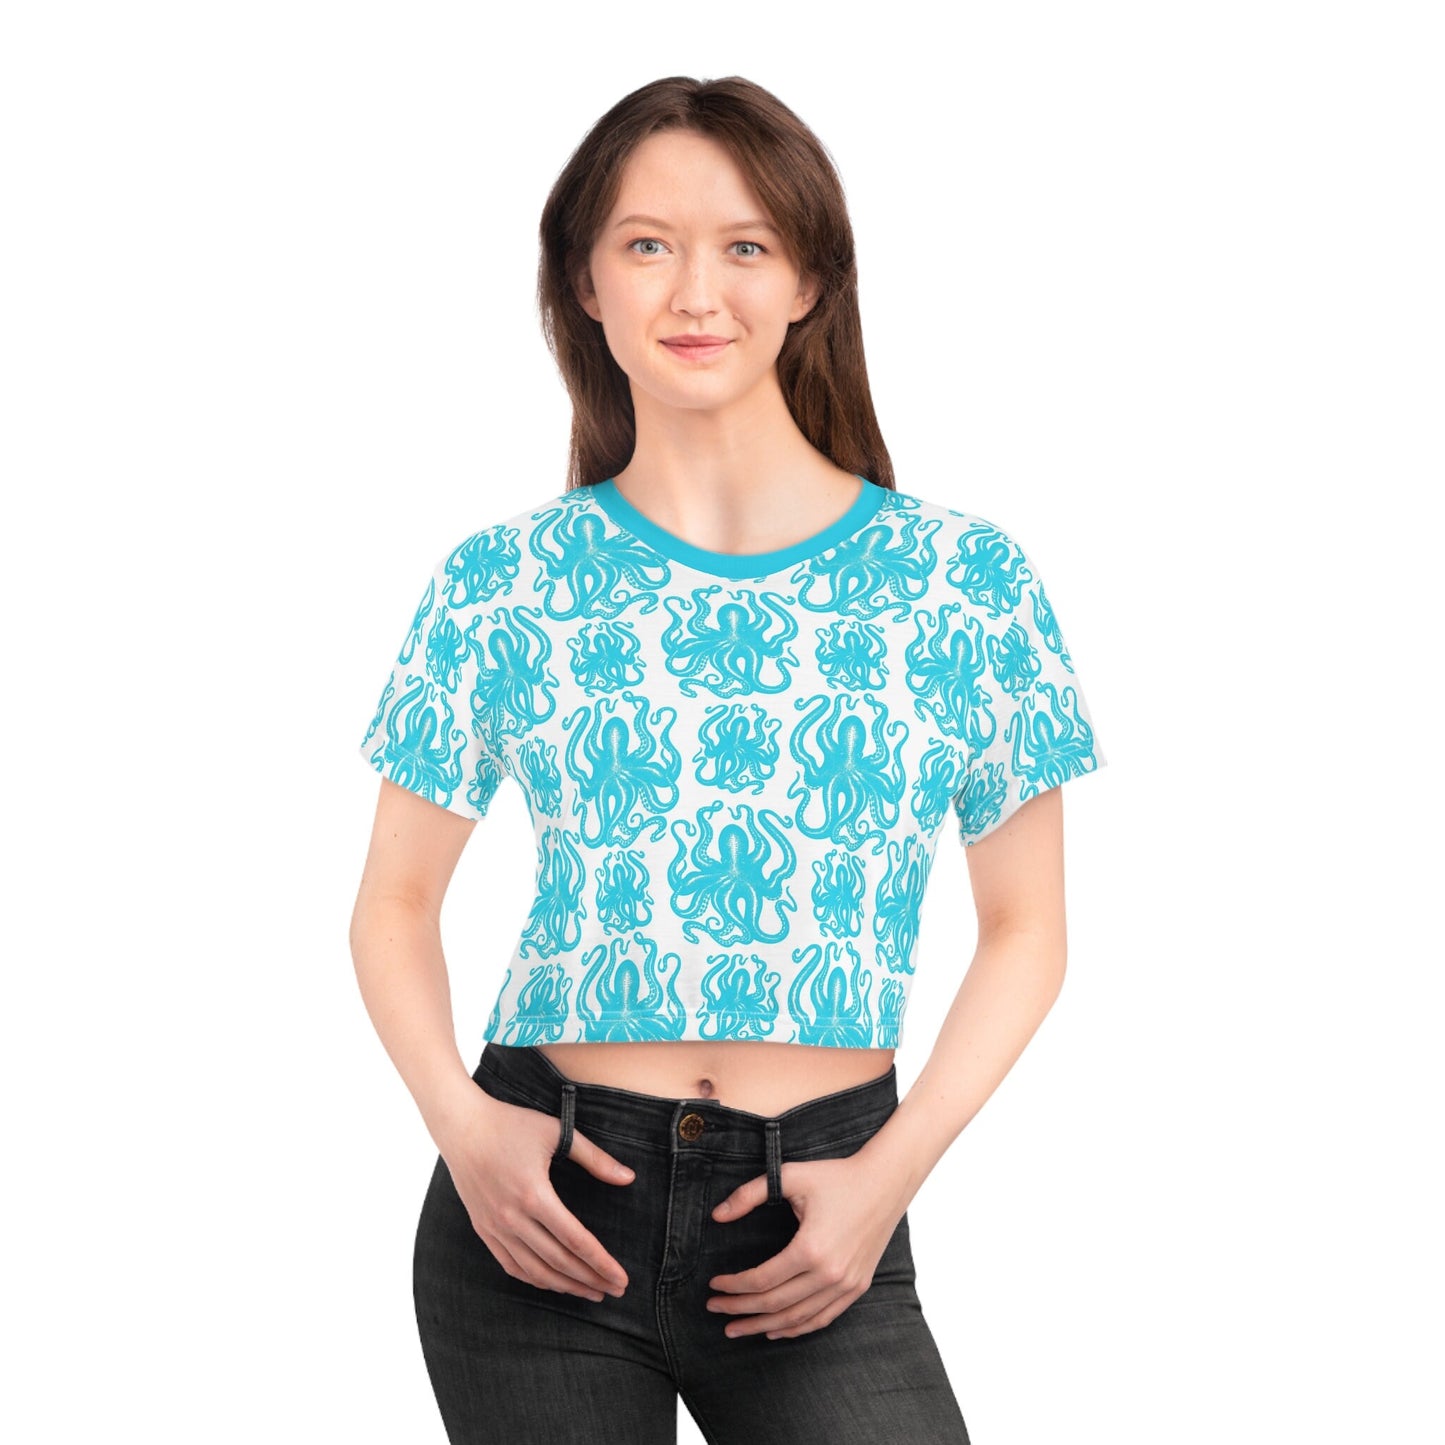 Summer Blue Octopus Crop Tee - Trendy, Casual, and Comfortable! Crop tee with Octopus Art, Fashionable and functional. Octopus Print